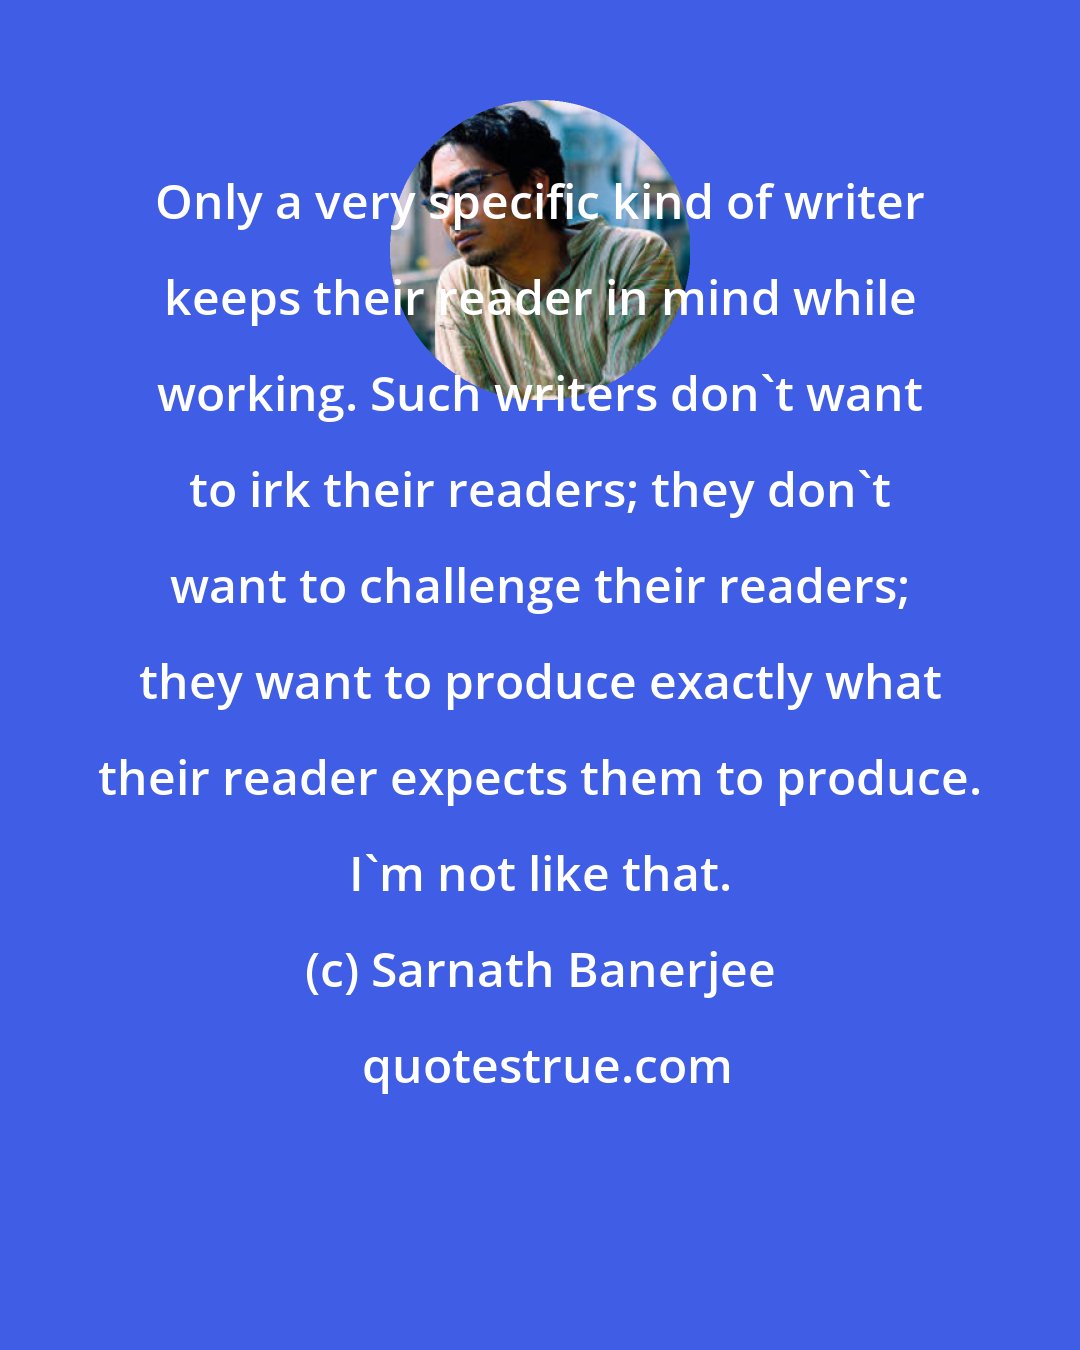 Sarnath Banerjee: Only a very specific kind of writer keeps their reader in mind while working. Such writers don't want to irk their readers; they don't want to challenge their readers; they want to produce exactly what their reader expects them to produce. I'm not like that.